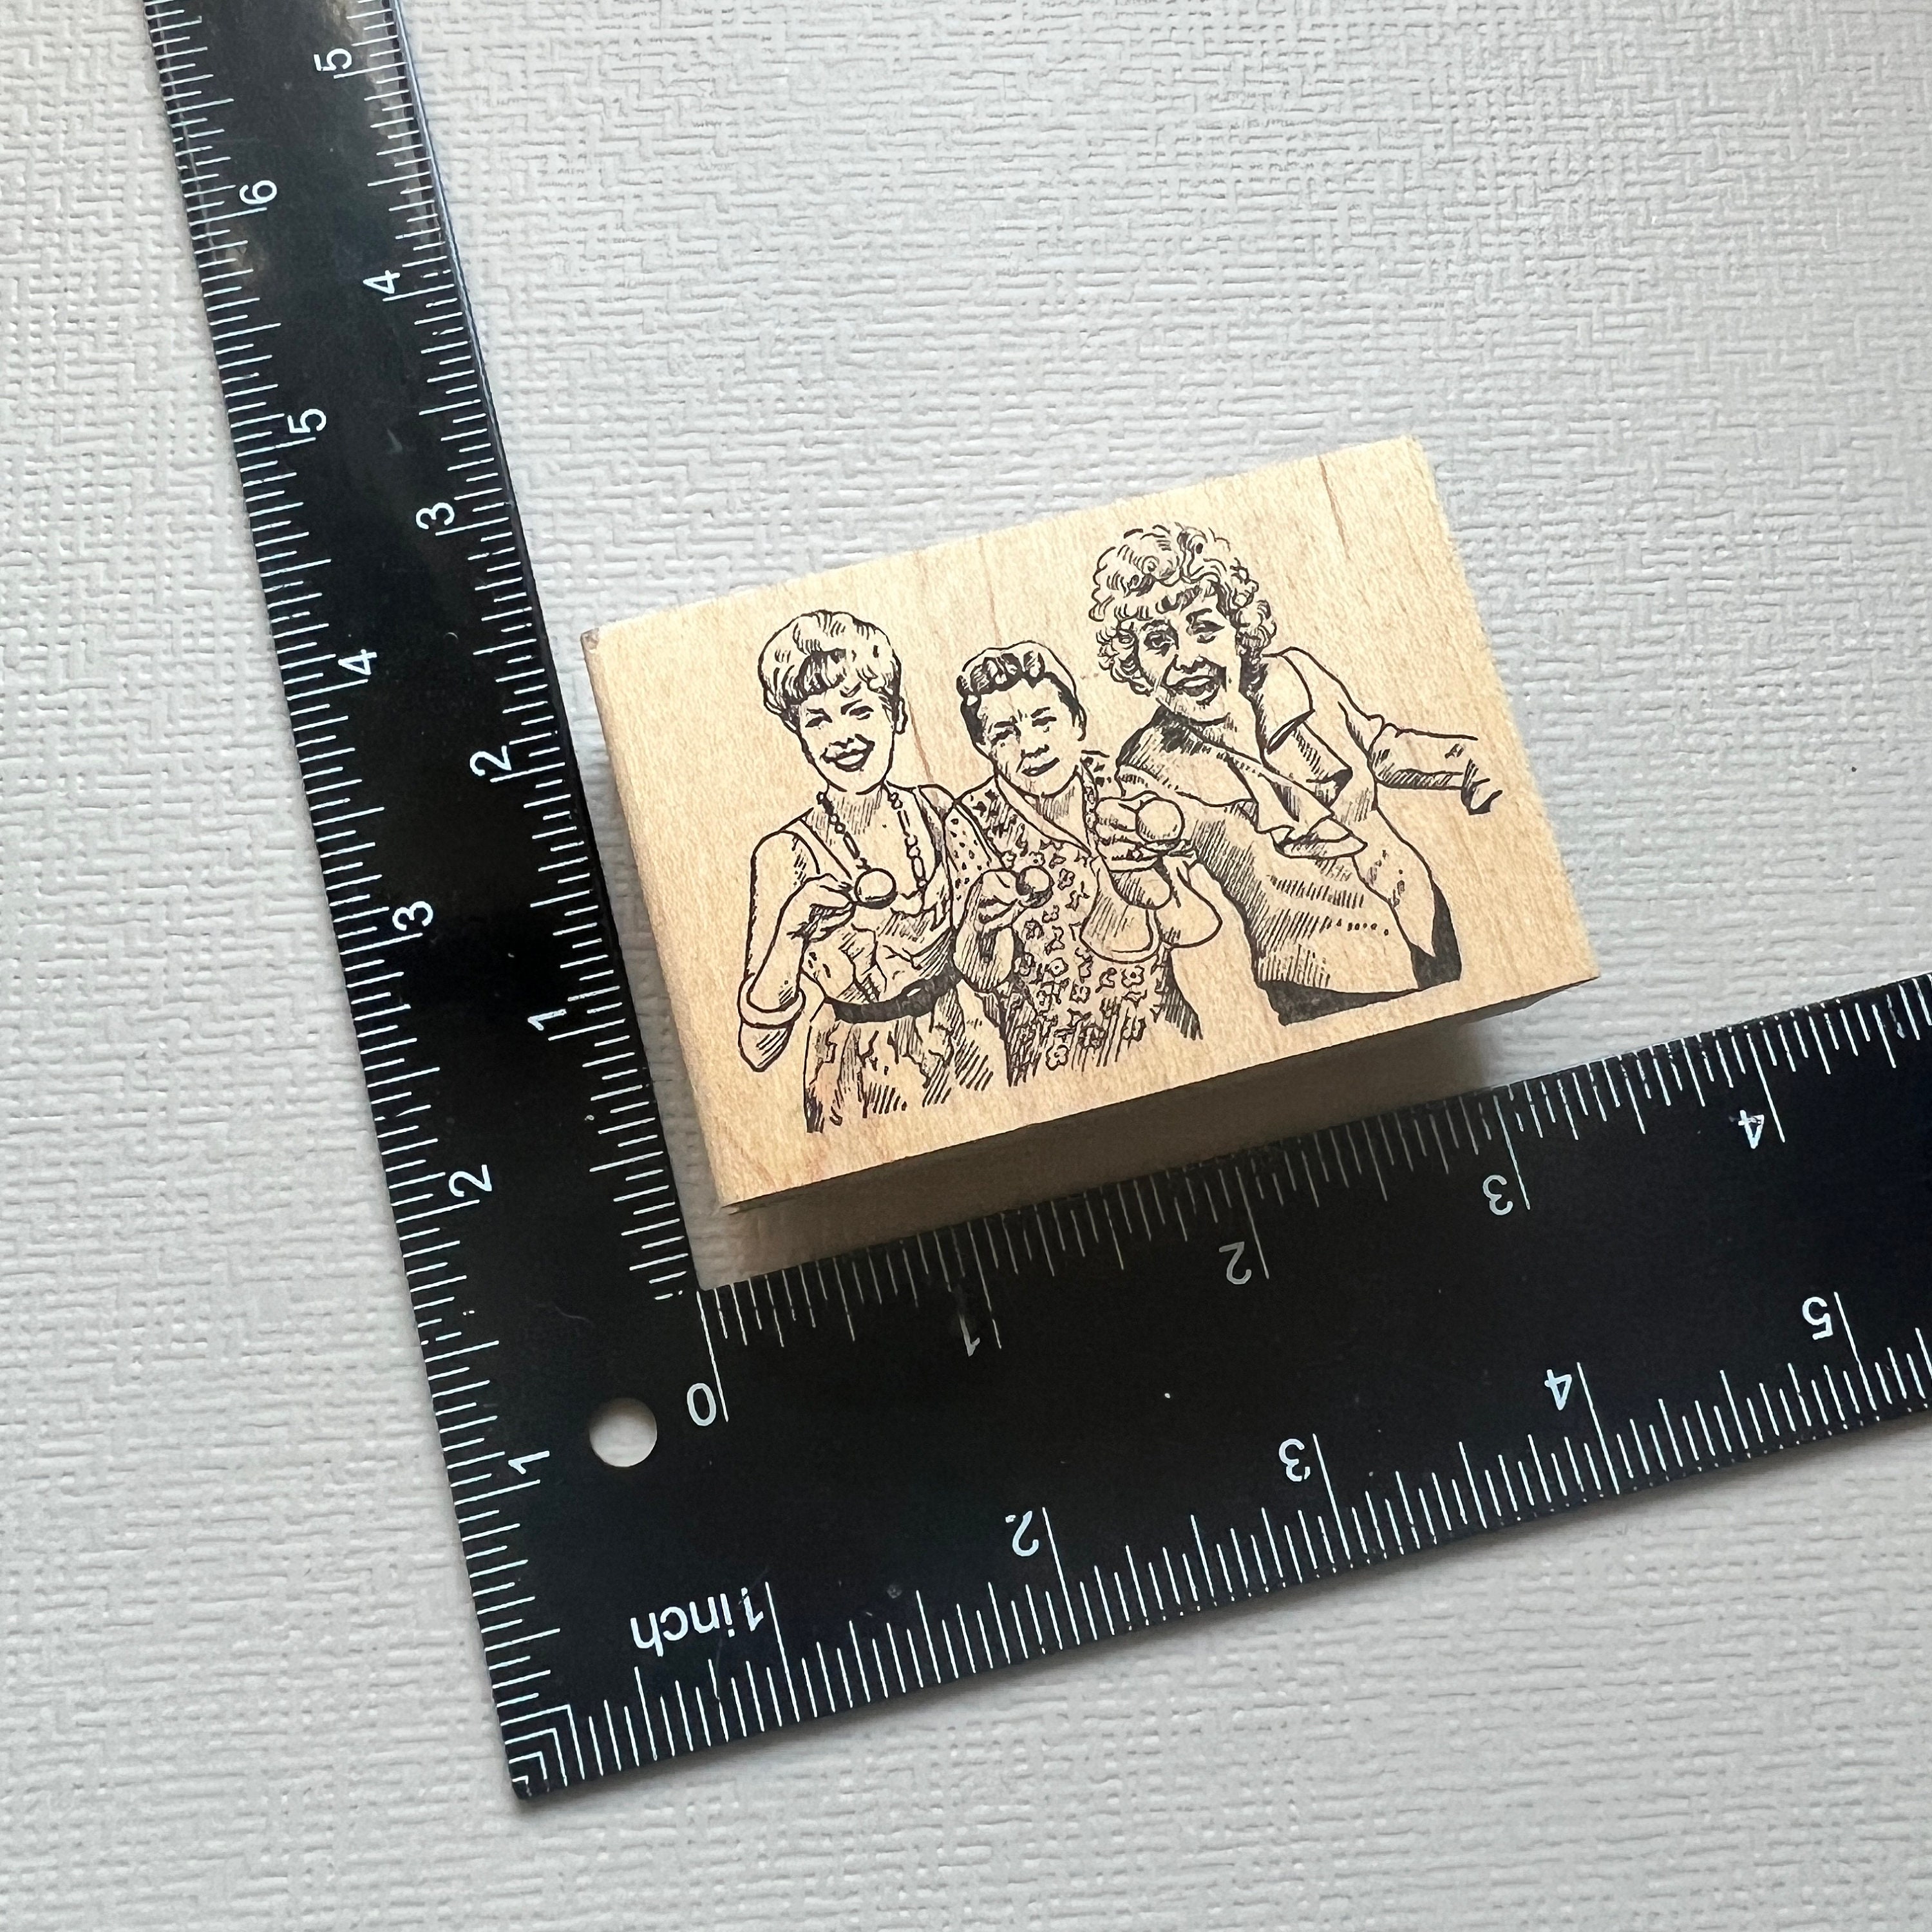 1 Pc Vintage Aesthetic Feeling Movement Series Wooden Rubber Stamp